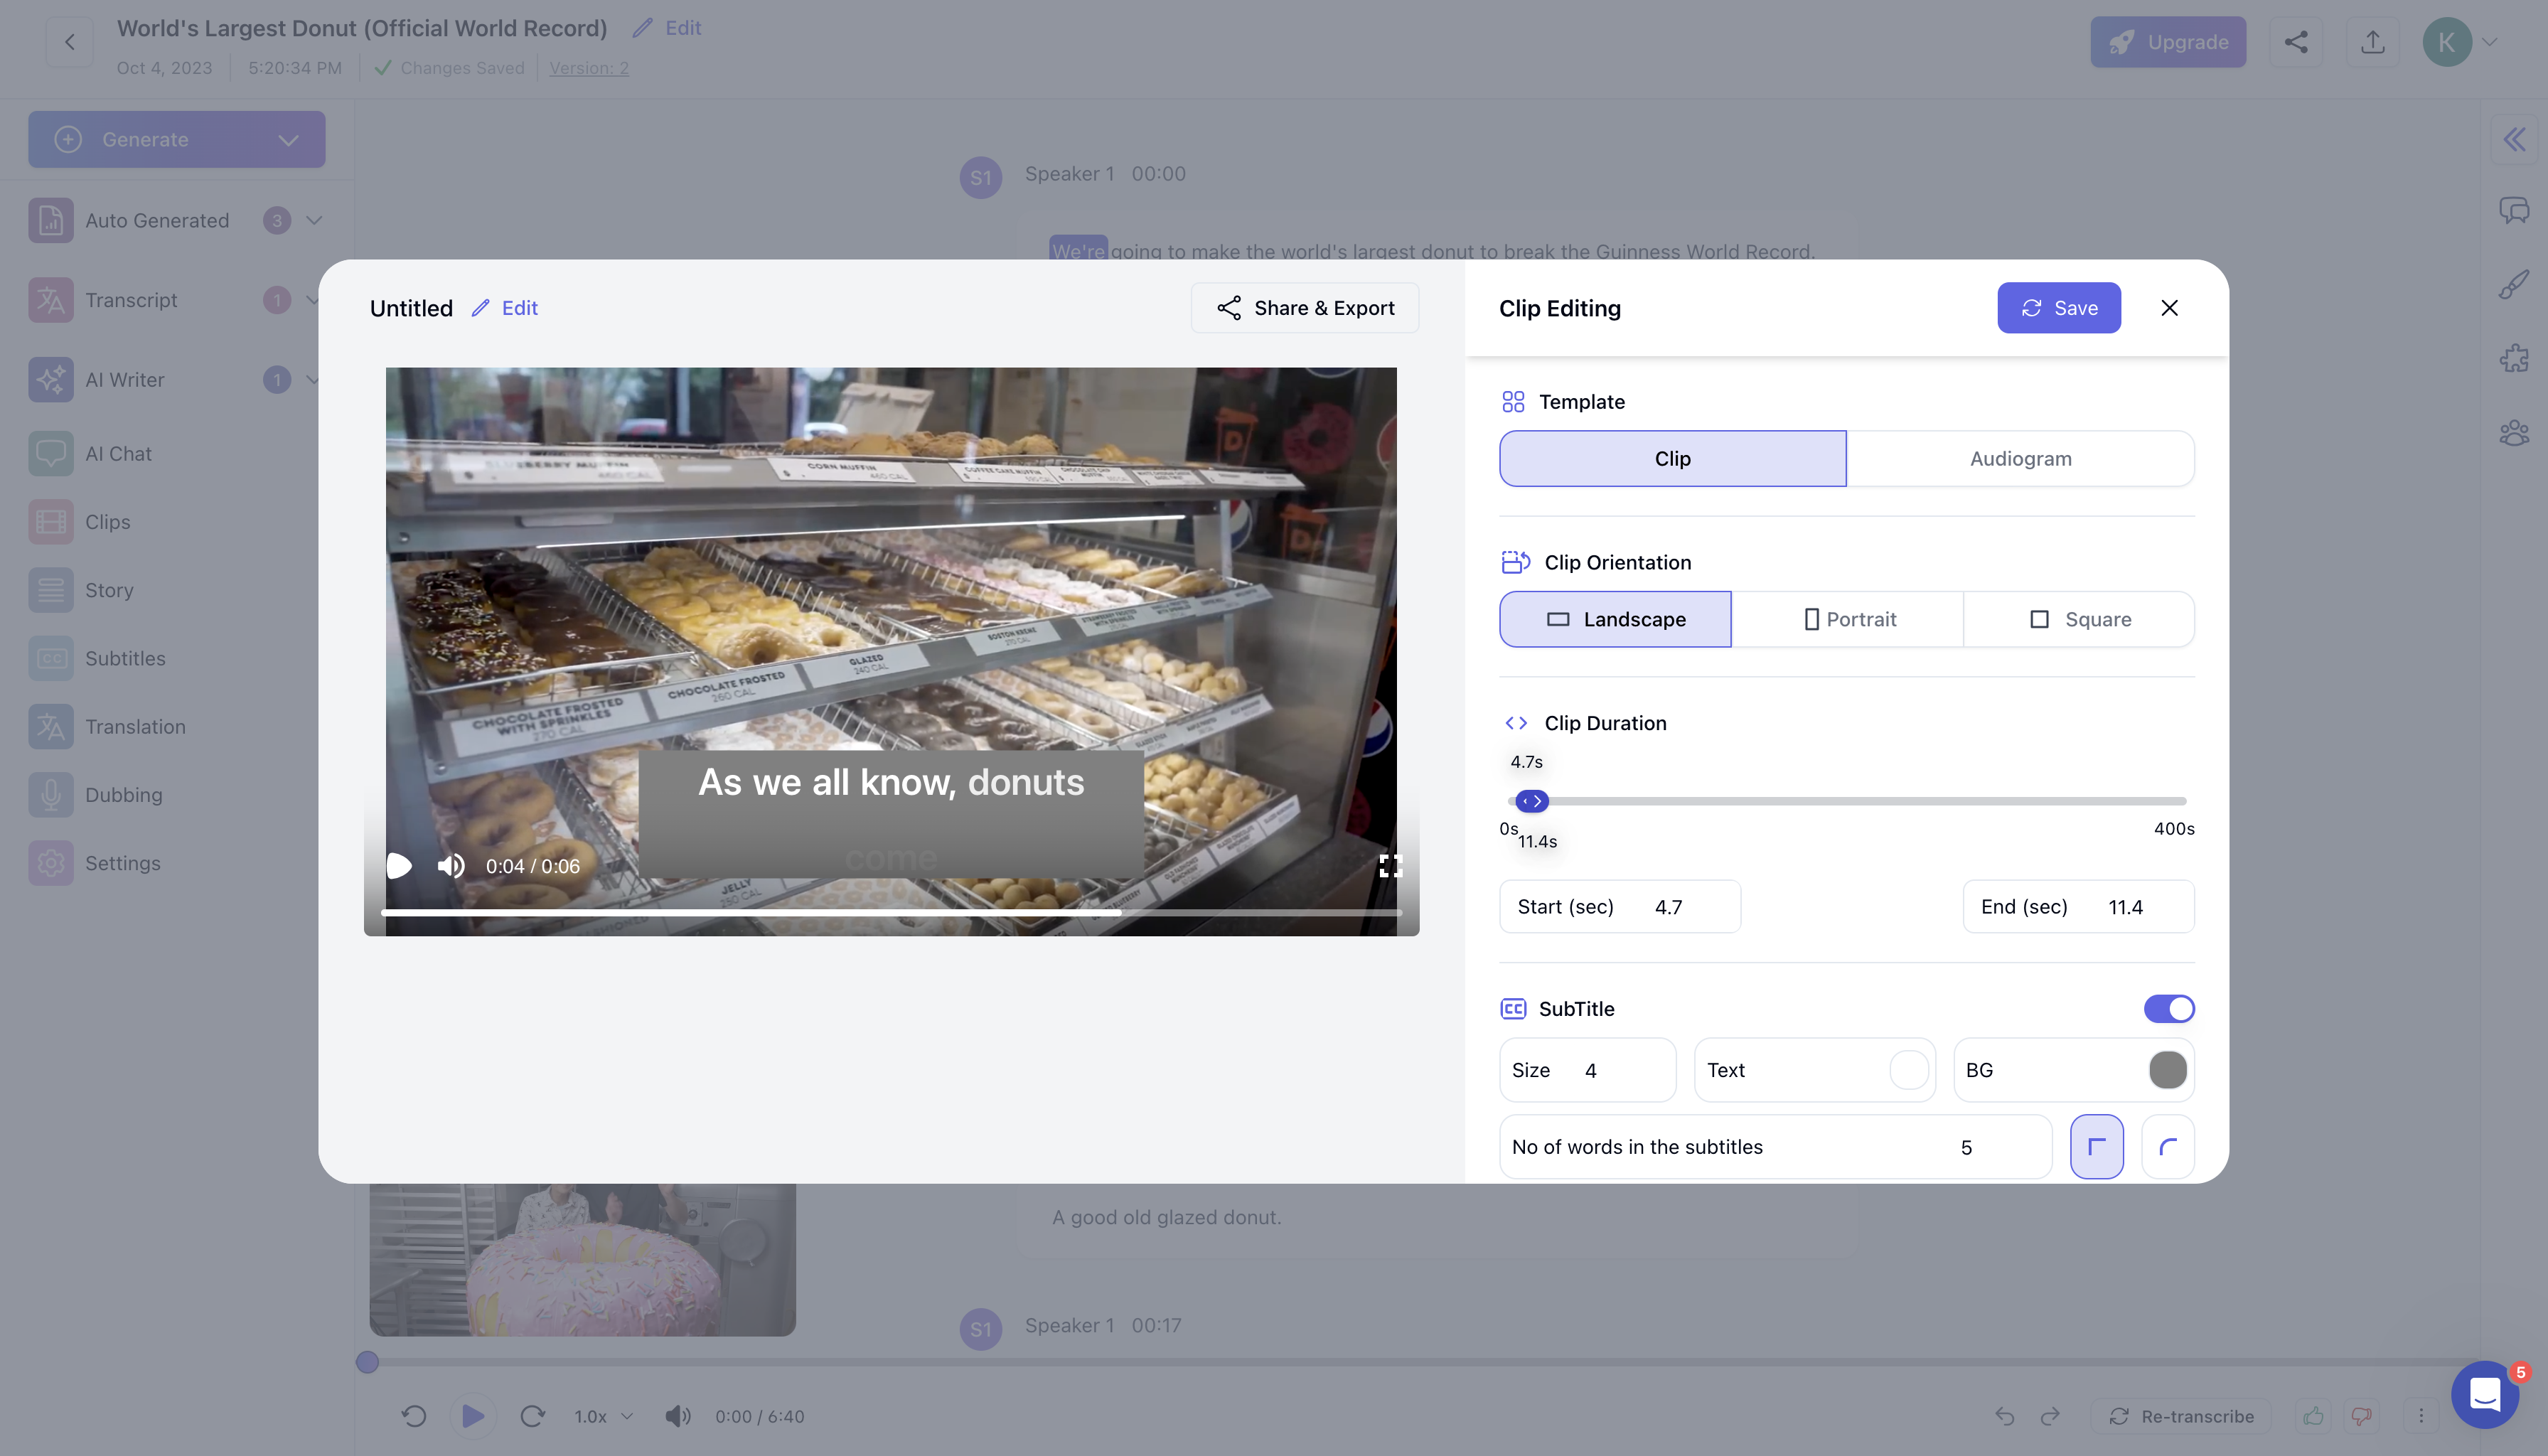 Our Clips feature allows you to create reels instantly for your social media handle. You can add subtitles and customise the dimensions of the reels.